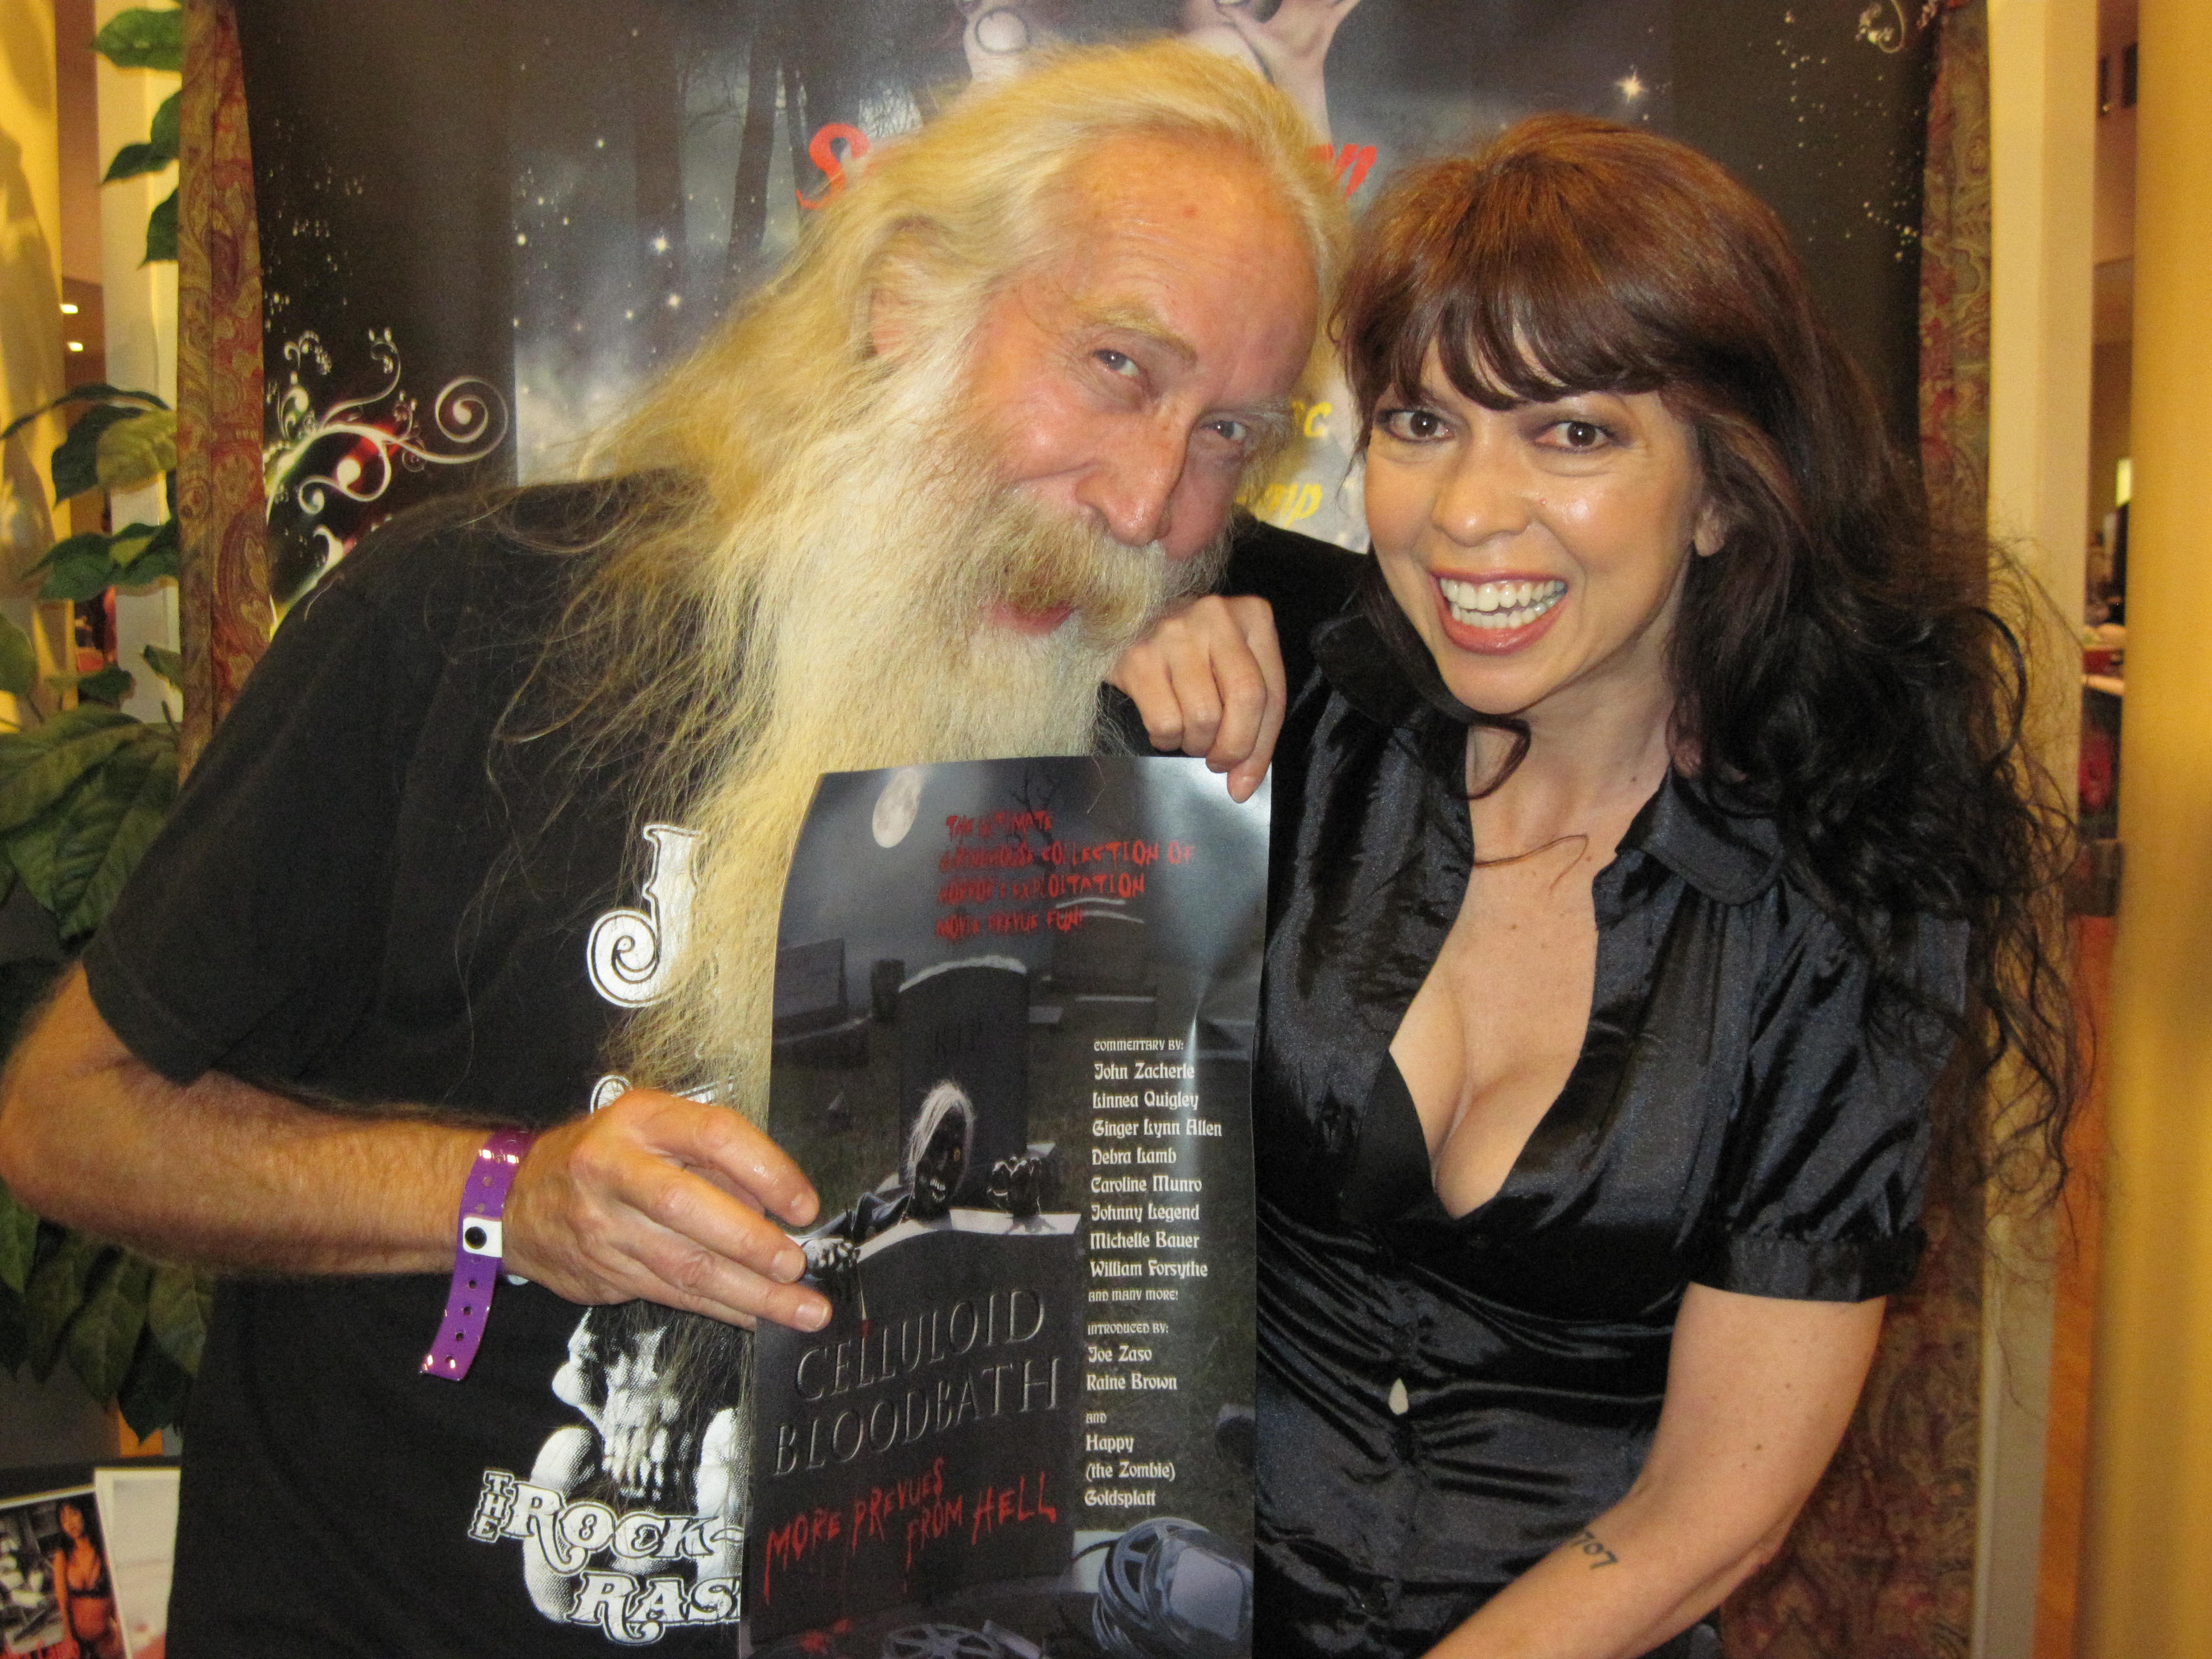 Debra Lamb with Johnny Legend at Miss Misery's DAYS OF TERROR Horror Con, September 28th, 2012 in Sacramento, CA.